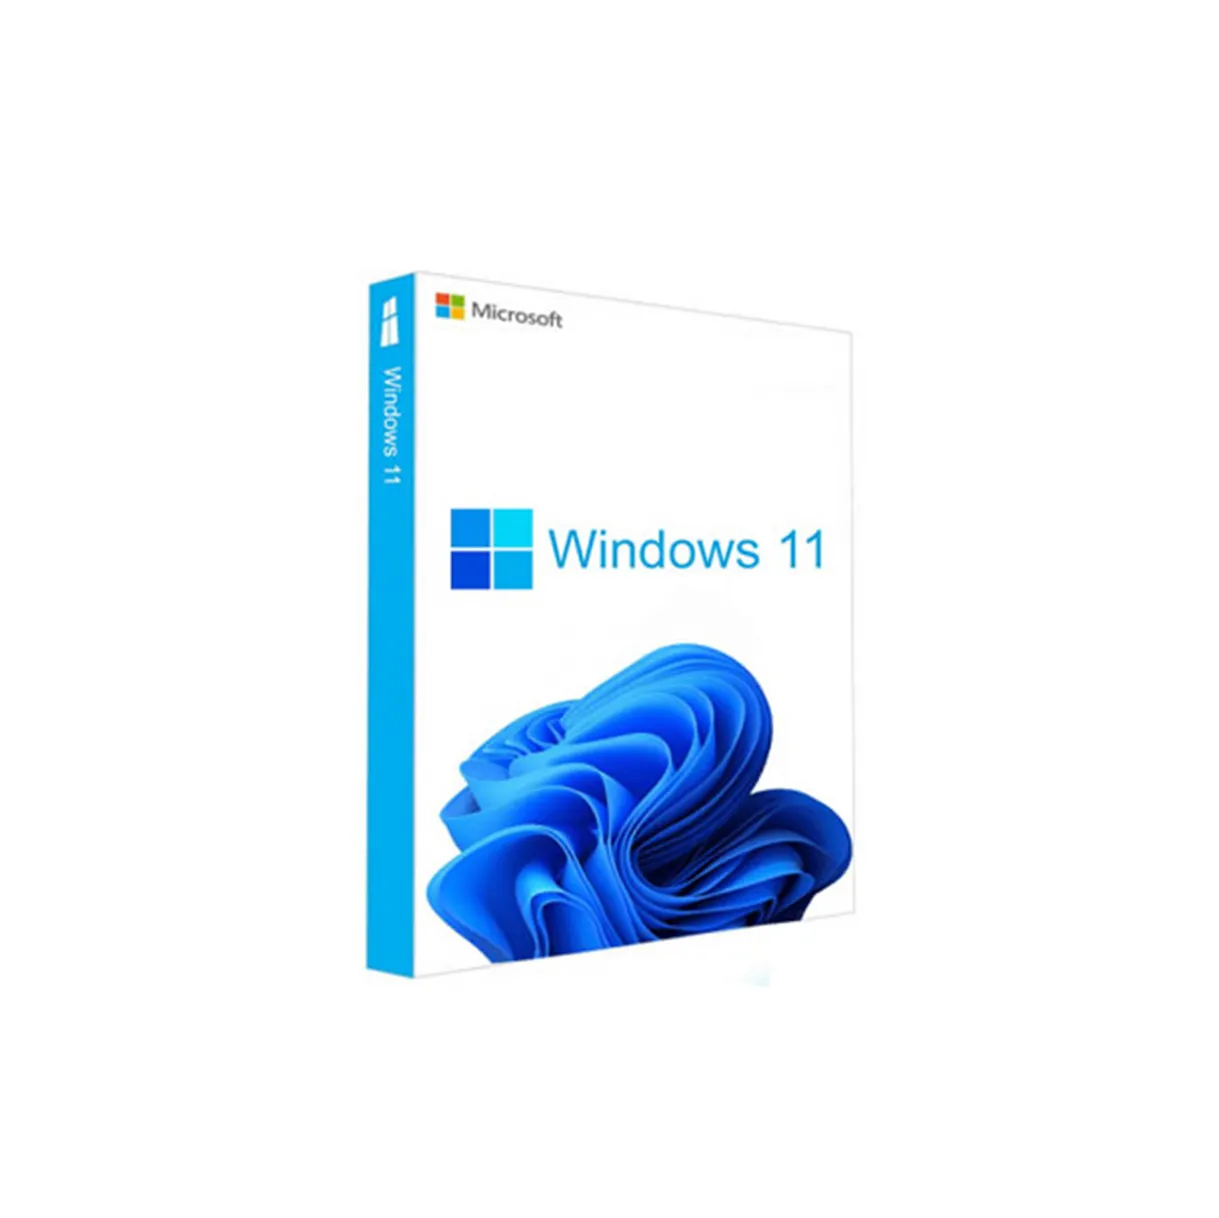 Microsoft Windows 11 Pro Retail Digital Key Code Win 11 Professional Key Email Delivery